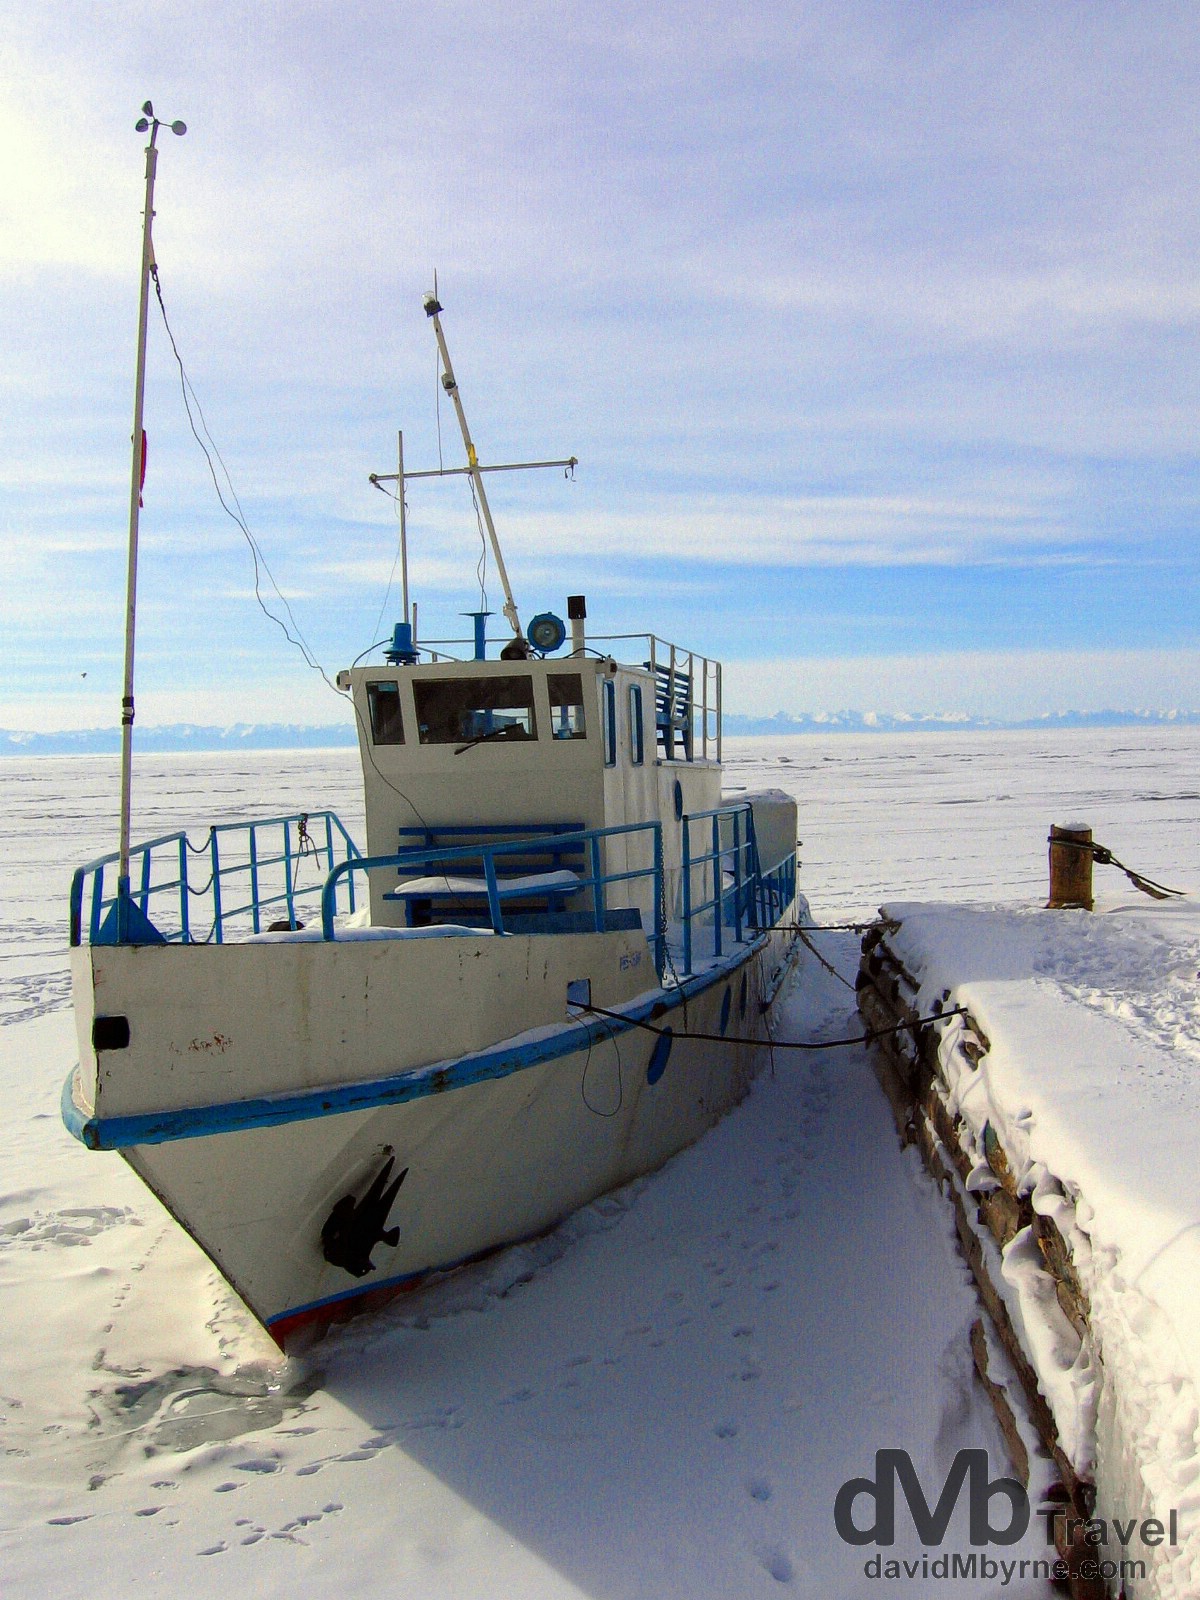 A boat waiting out the winter freeze in the fishing port of Listvyanka on the shores of Lake Baikal. Listvyanka, Siberia, Russia. February 18th, 2006.